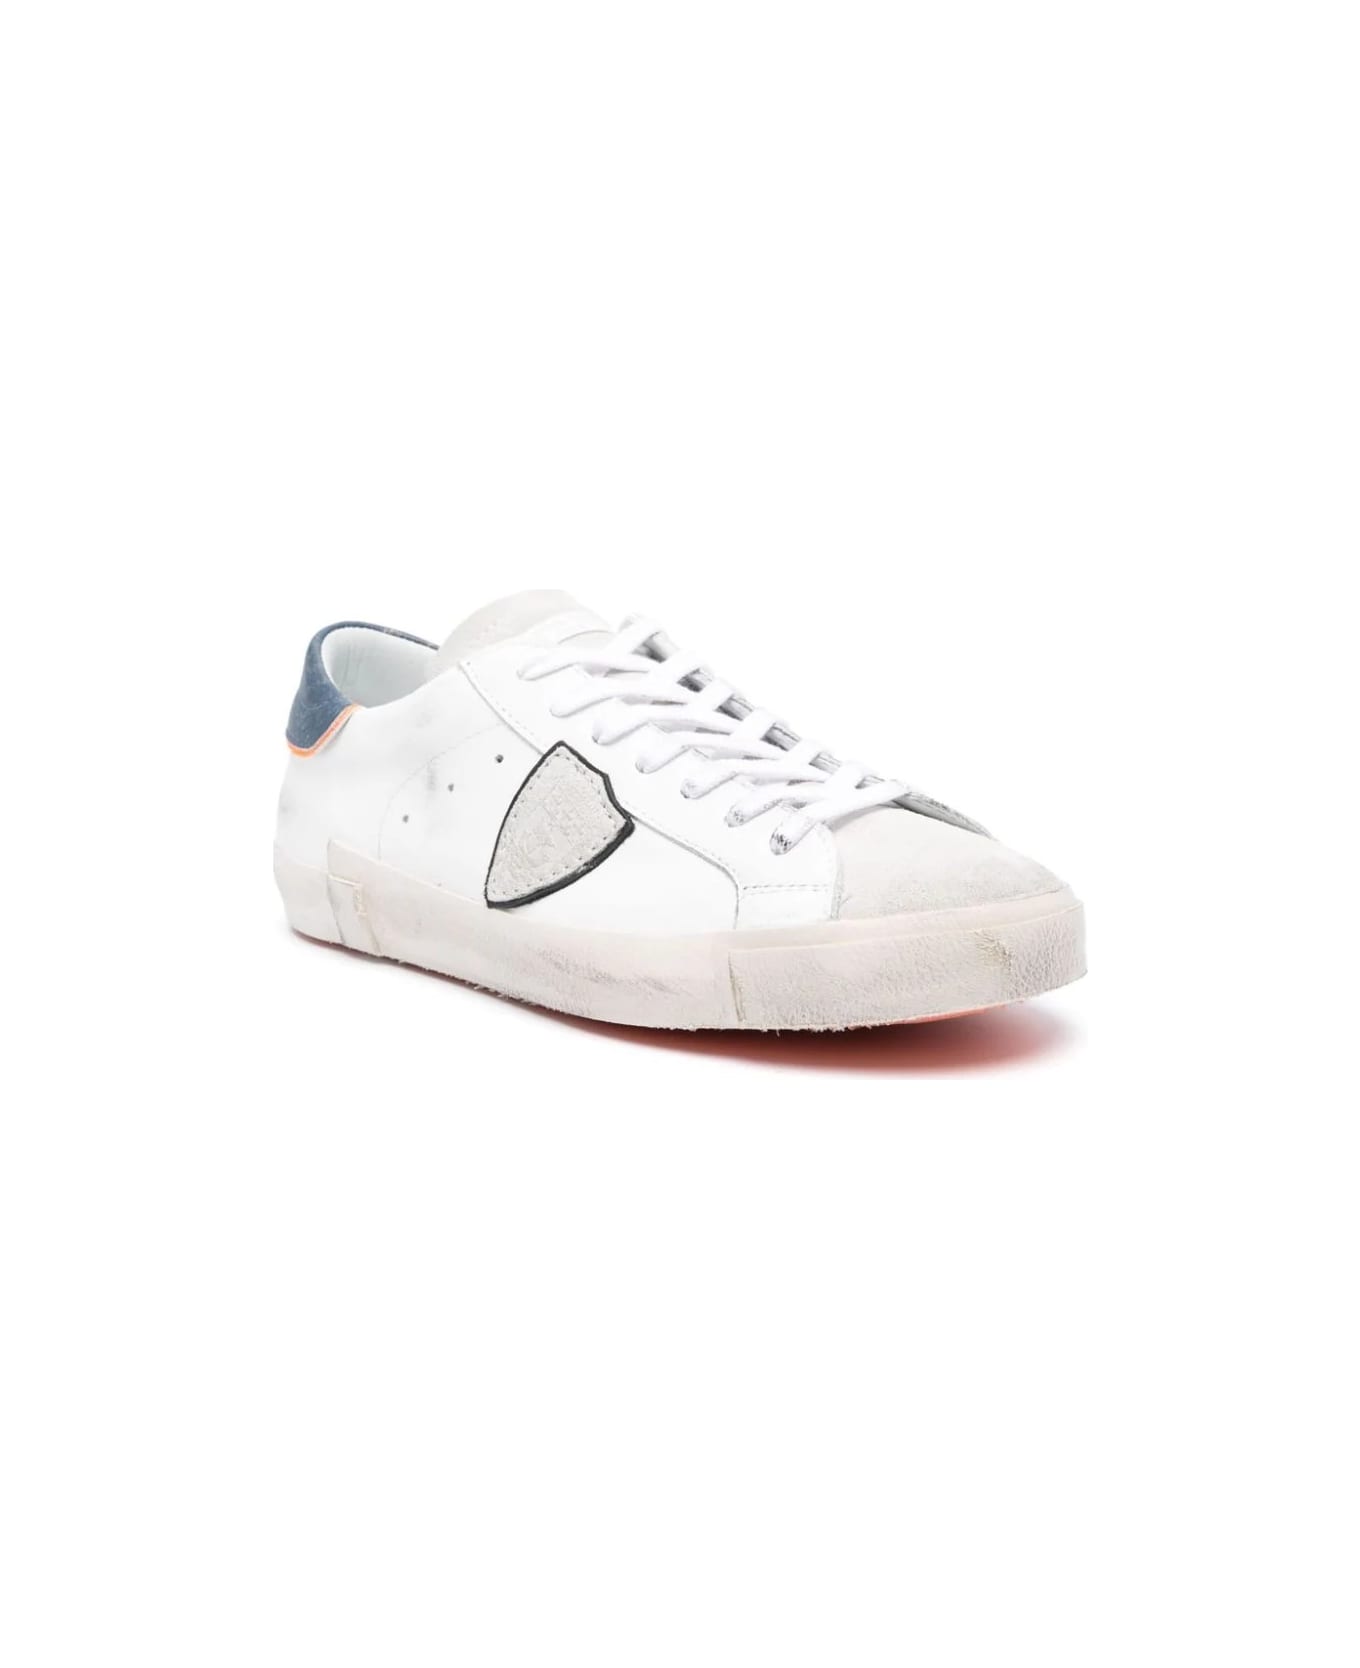 Philippe Model Prsx Low Sneakers - White, Blue And Orange - White スニーカー